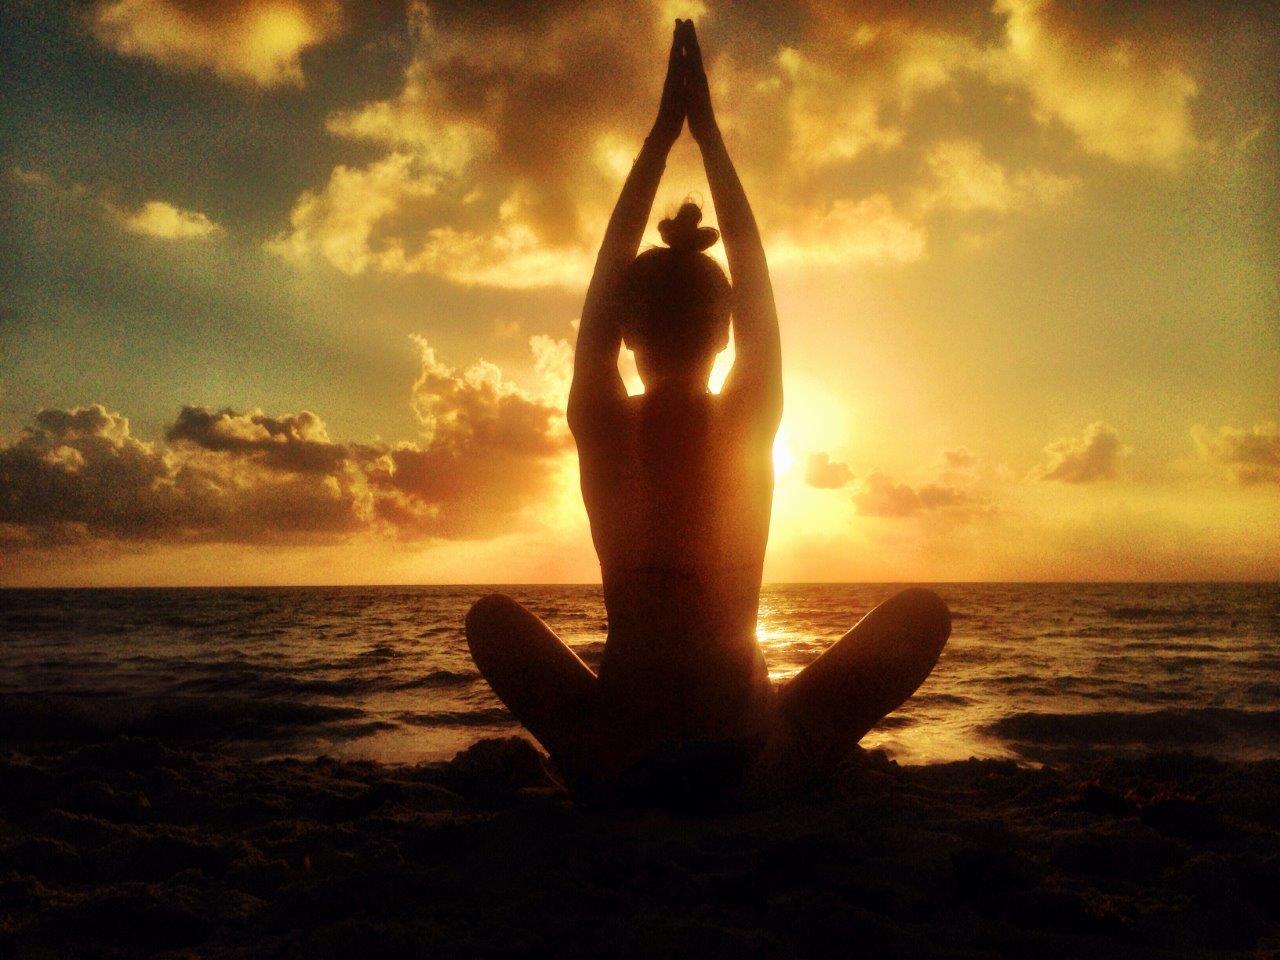 Silhouette of a person doing yoga on the beach at sunrise or sunset